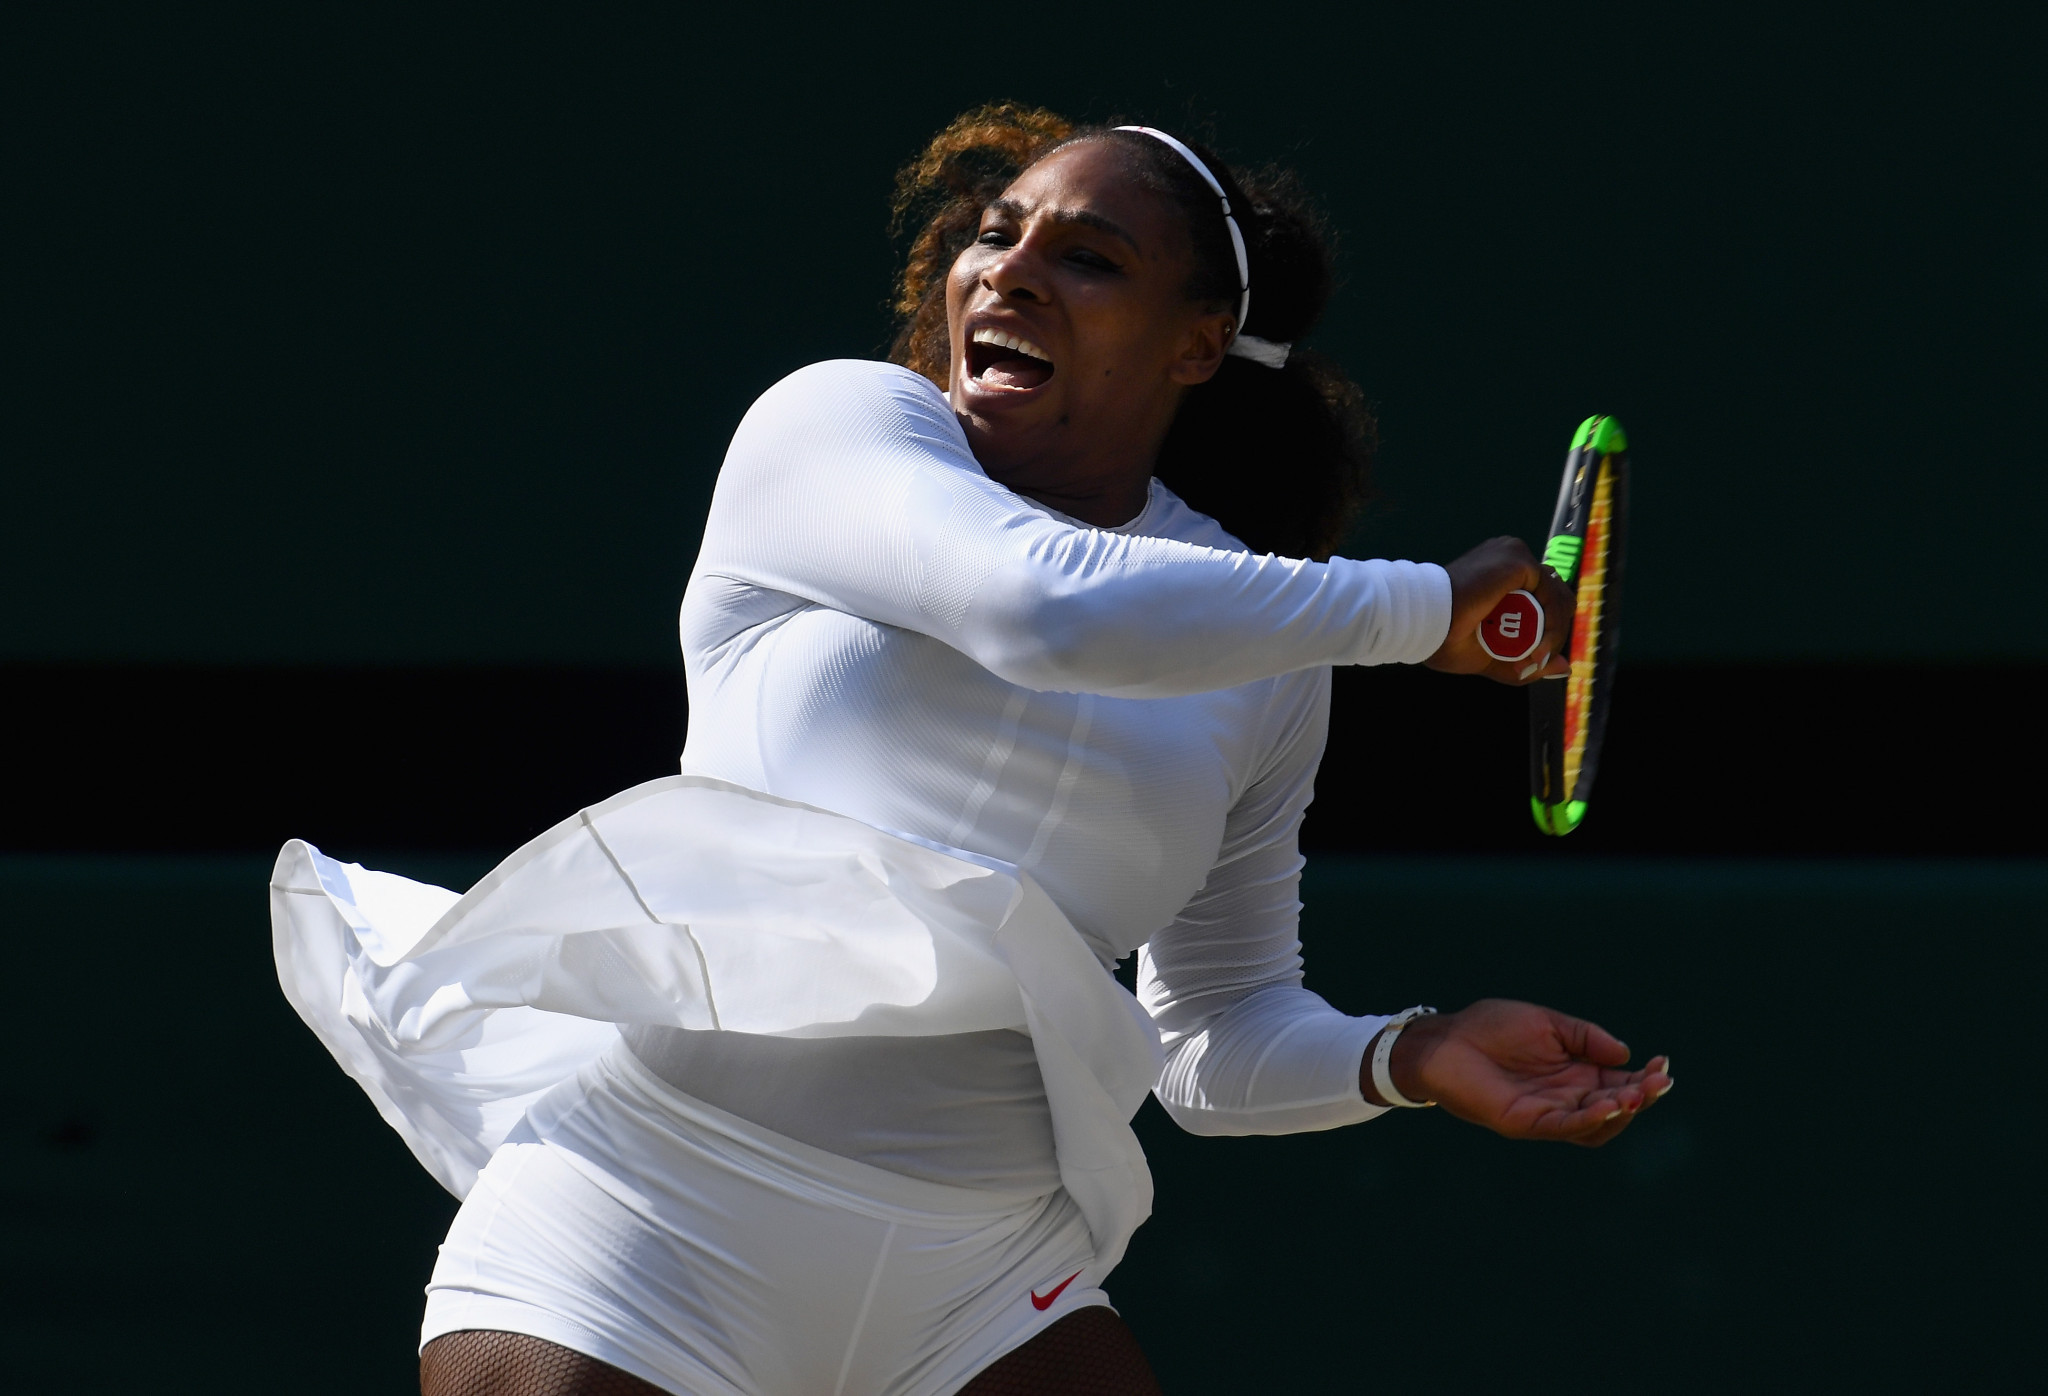 Twenty-three-time Grand Slam champion Serena Williams has tweeted to suggest the amount she is drug tested in comparison to other players is "discrimination" ©Getty Images